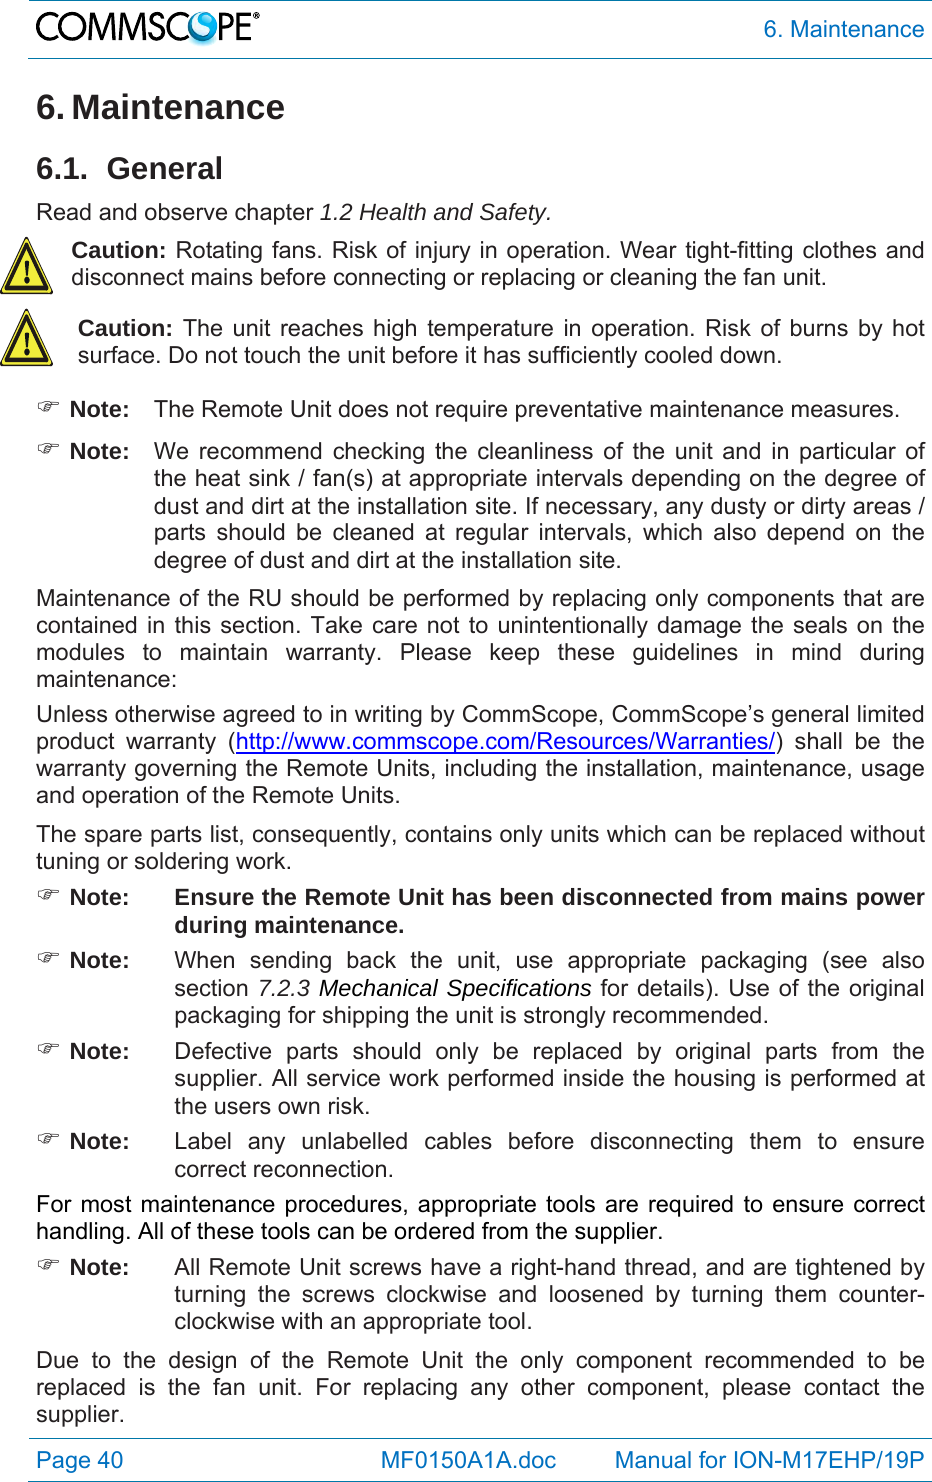  6. Maintenance Page 40            MF0150A1A.doc         Manual for ION-M17EHP/19P 6. Maintenance 6.1. General Read and observe chapter 1.2 Health and Safety. Caution: Rotating fans. Risk of injury in operation. Wear tight-fitting clothes and disconnect mains before connecting or replacing or cleaning the fan unit. Caution: The unit reaches high temperature in operation. Risk of burns by hot surface. Do not touch the unit before it has sufficiently cooled down.  Note:  The Remote Unit does not require preventative maintenance measures.  Note:  We recommend checking the cleanliness of the unit and in particular of the heat sink / fan(s) at appropriate intervals depending on the degree of dust and dirt at the installation site. If necessary, any dusty or dirty areas / parts should be cleaned at regular intervals, which also depend on the degree of dust and dirt at the installation site. Maintenance of the RU should be performed by replacing only components that are contained in this section. Take care not to unintentionally damage the seals on the modules to maintain warranty. Please keep these guidelines in mind during maintenance: Unless otherwise agreed to in writing by CommScope, CommScope’s general limited product warranty (http://www.commscope.com/Resources/Warranties/) shall be the warranty governing the Remote Units, including the installation, maintenance, usage and operation of the Remote Units. The spare parts list, consequently, contains only units which can be replaced without tuning or soldering work.  Note:  Ensure the Remote Unit has been disconnected from mains power during maintenance.  Note:  When sending back the unit, use appropriate packaging (see also section 7.2.3 Mechanical Specifications for details). Use of the original packaging for shipping the unit is strongly recommended.  Note:  Defective parts should only be replaced by original parts from the supplier. All service work performed inside the housing is performed at the users own risk.  Note:  Label any unlabelled cables before disconnecting them to ensure correct reconnection. For most maintenance procedures, appropriate tools are required to ensure correct handling. All of these tools can be ordered from the supplier.   Note:   All Remote Unit screws have a right-hand thread, and are tightened by turning the screws clockwise and loosened by turning them counter-clockwise with an appropriate tool. Due to the design of the Remote Unit the only component recommended to be replaced is the fan unit. For replacing any other component, please contact the supplier. 